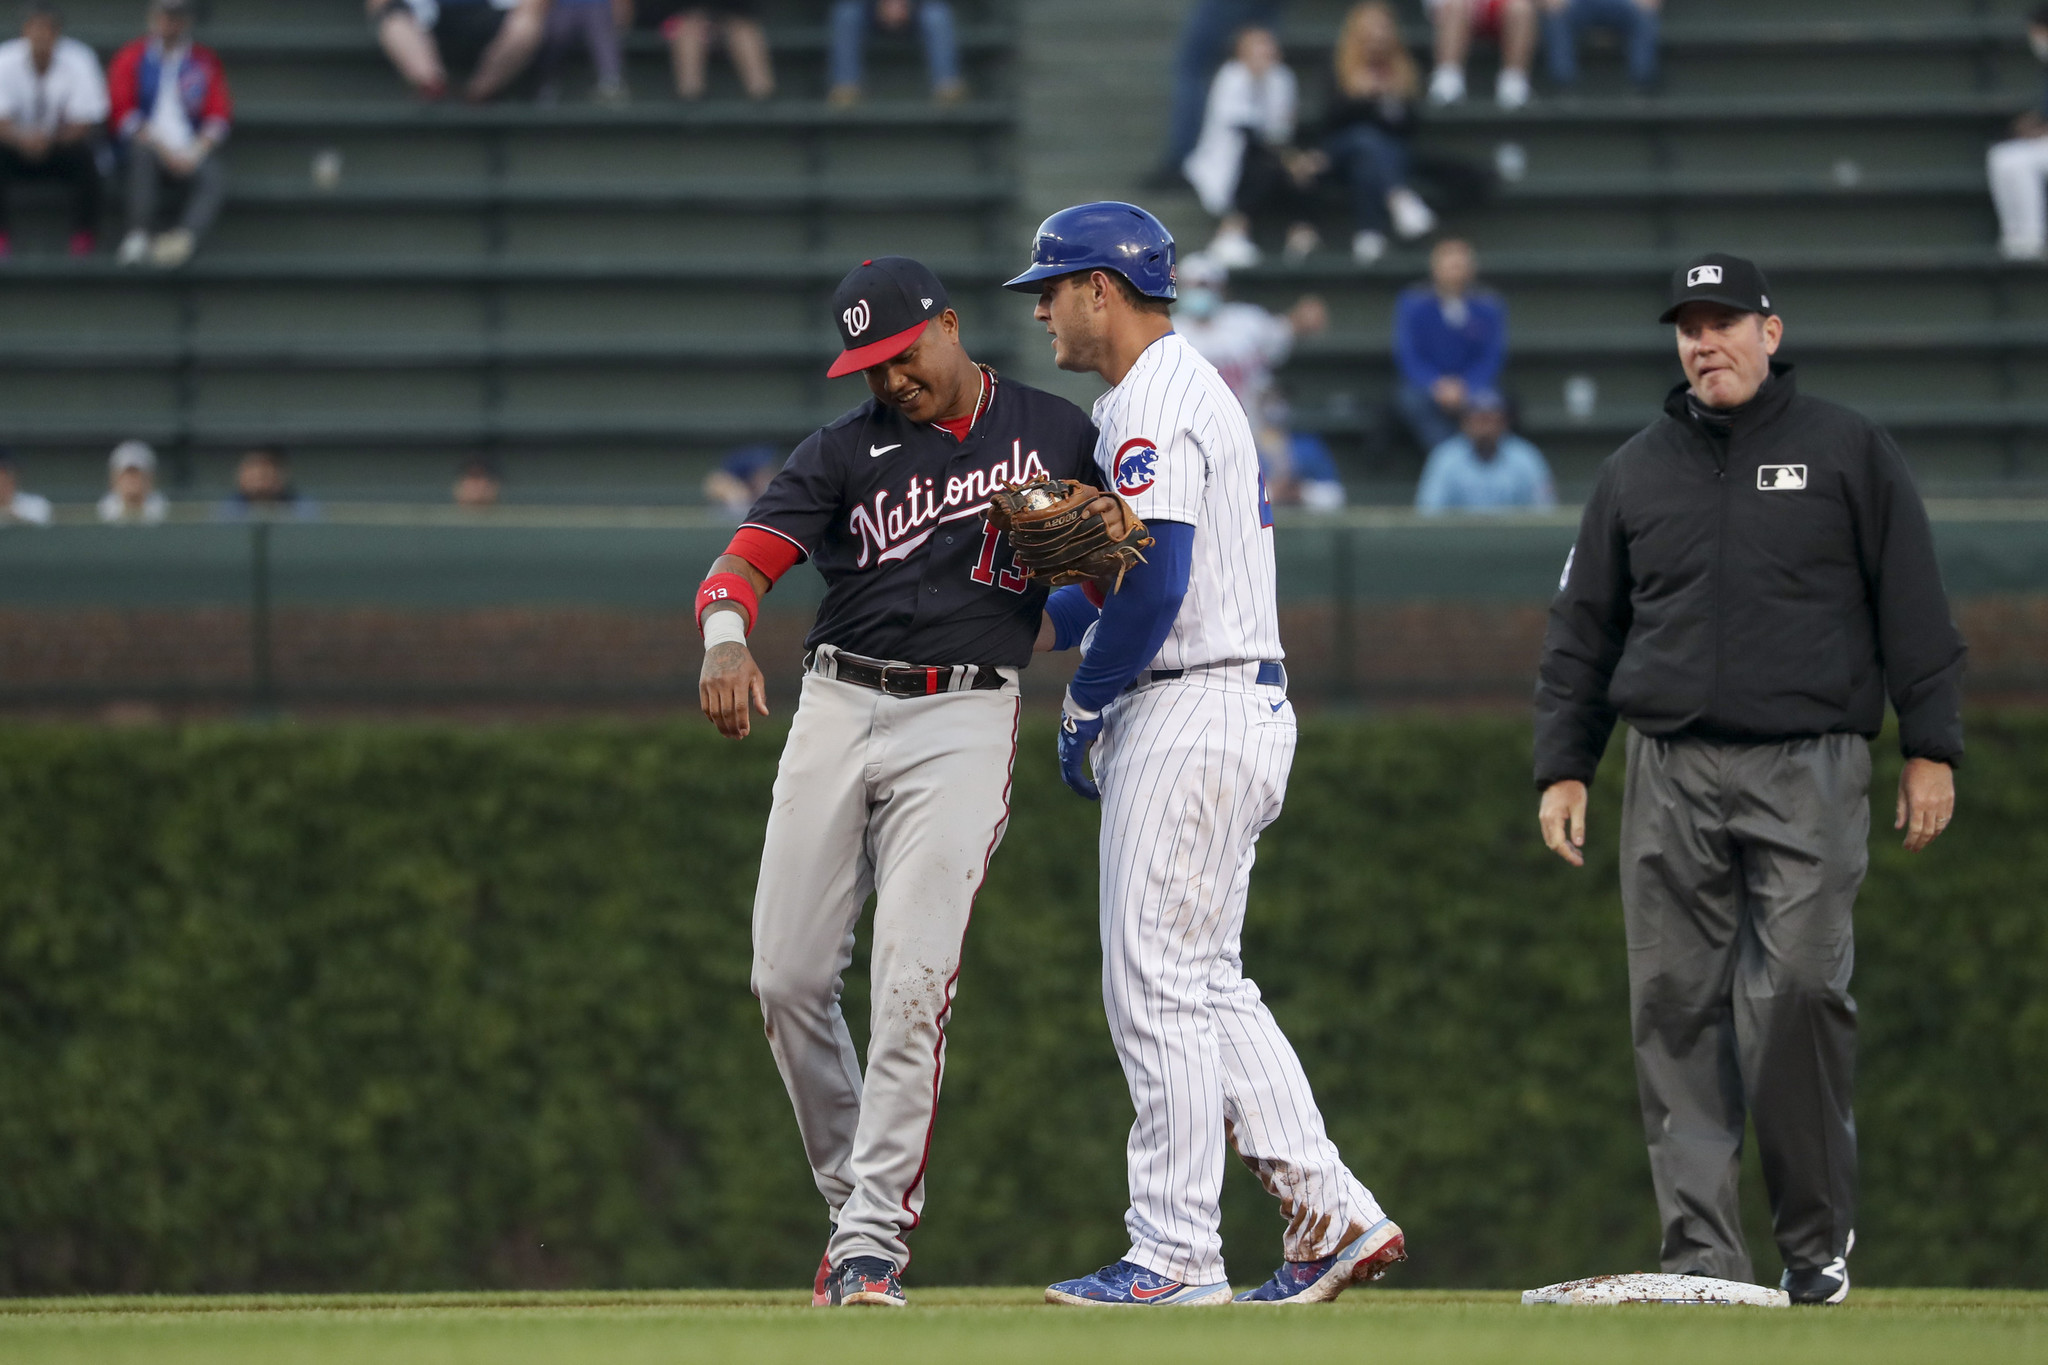 Lester, Schwarber return to Wrigley Field with Nationals